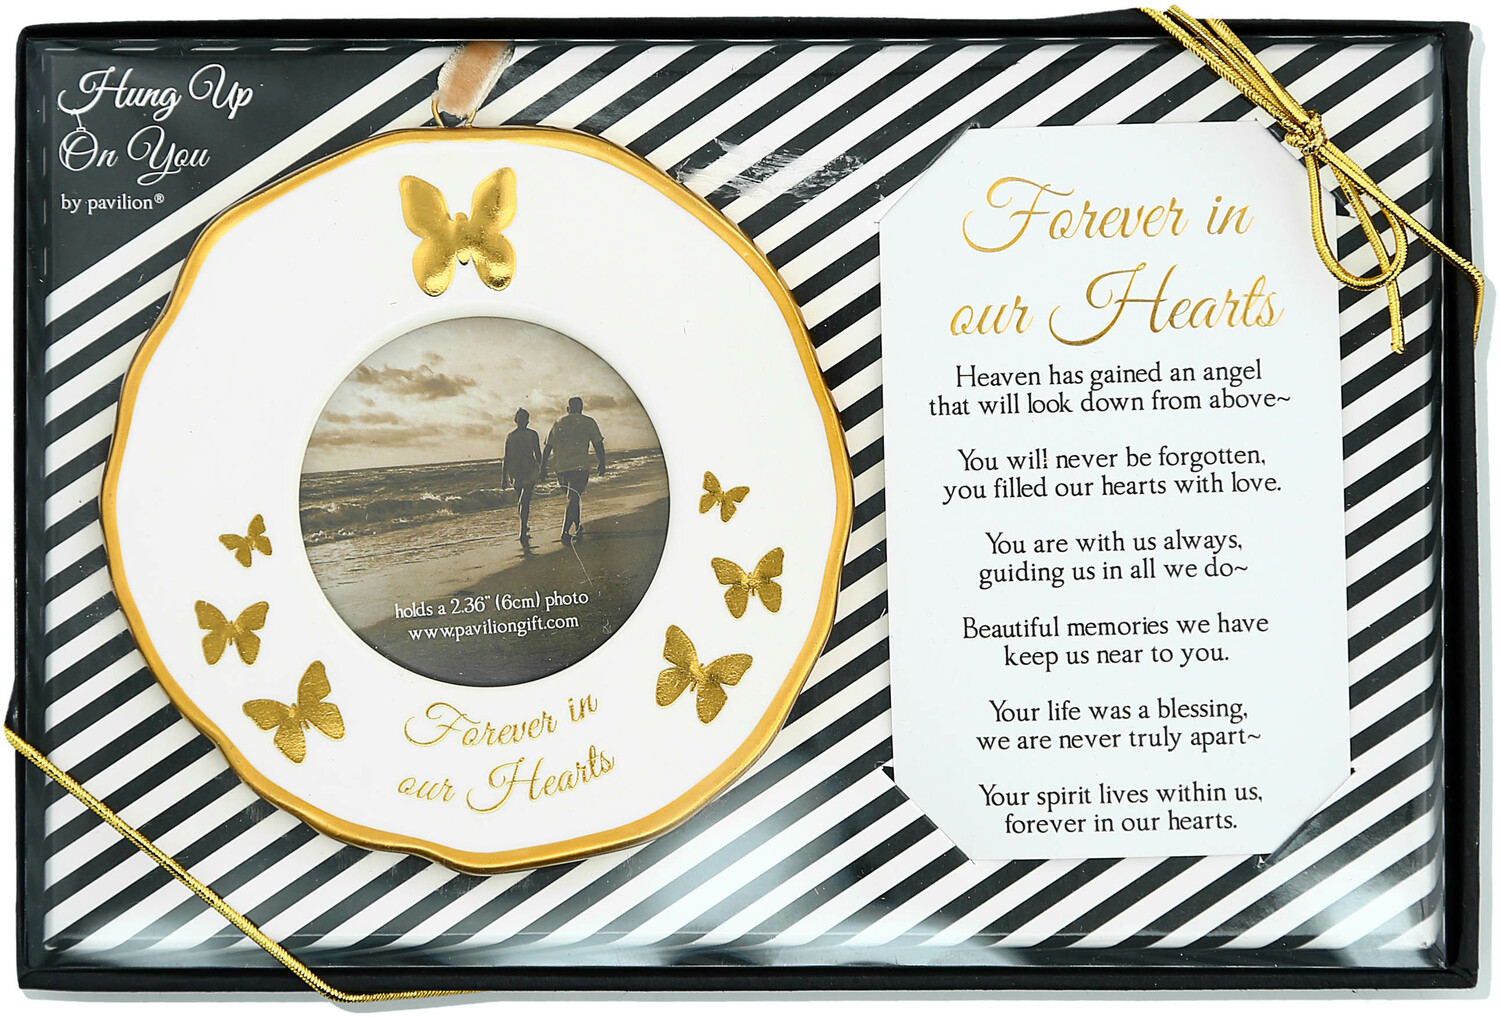 Forever in our Hearts by Hung Up on You - Forever in our Hearts - 4" Photo Frame Ornament
